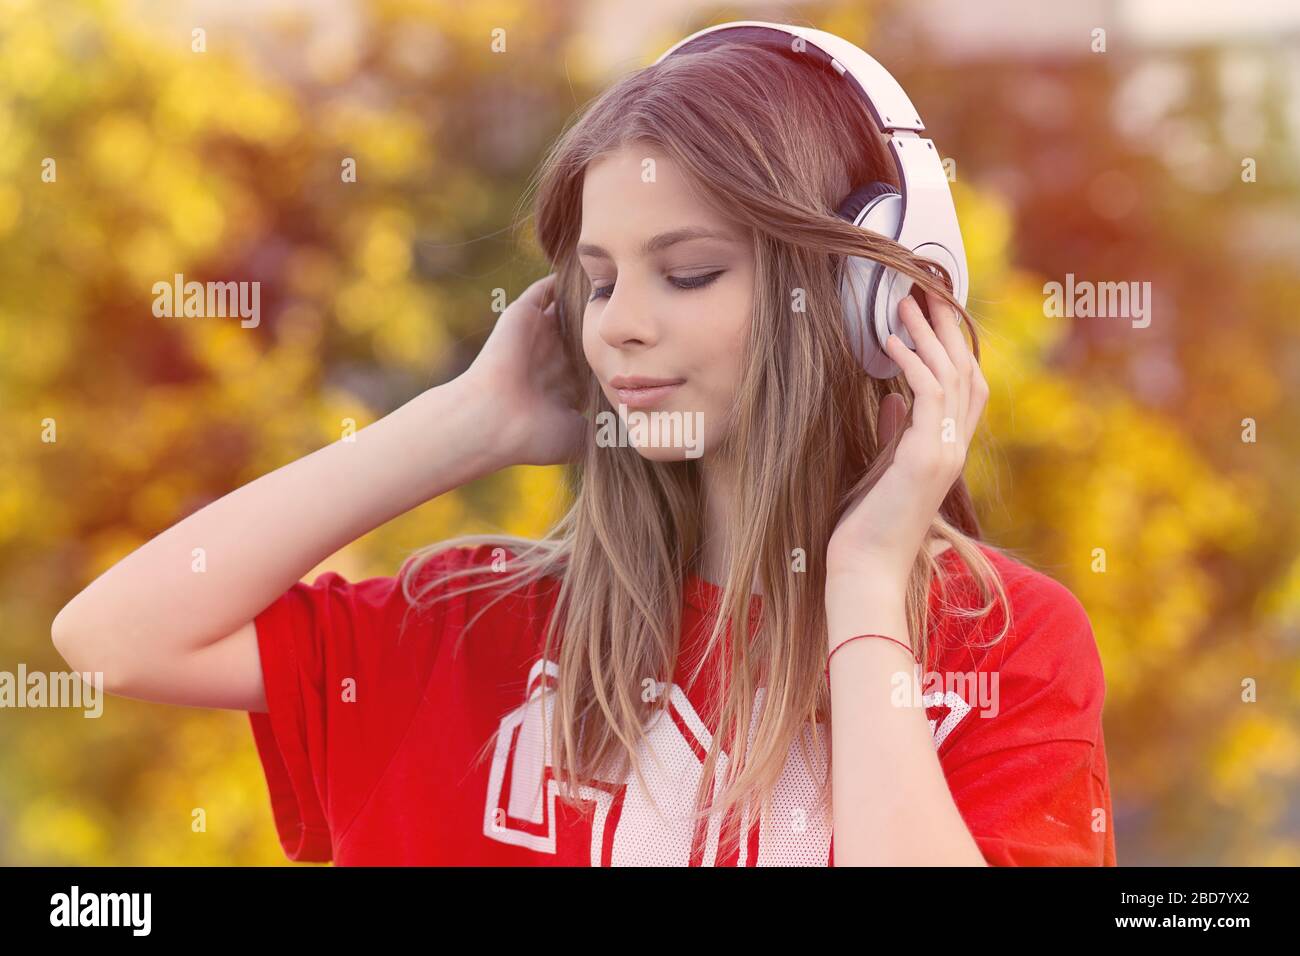 Young happy woman listening to music on headphones standing outdoors on autumn colorful leaves background Stock Photo